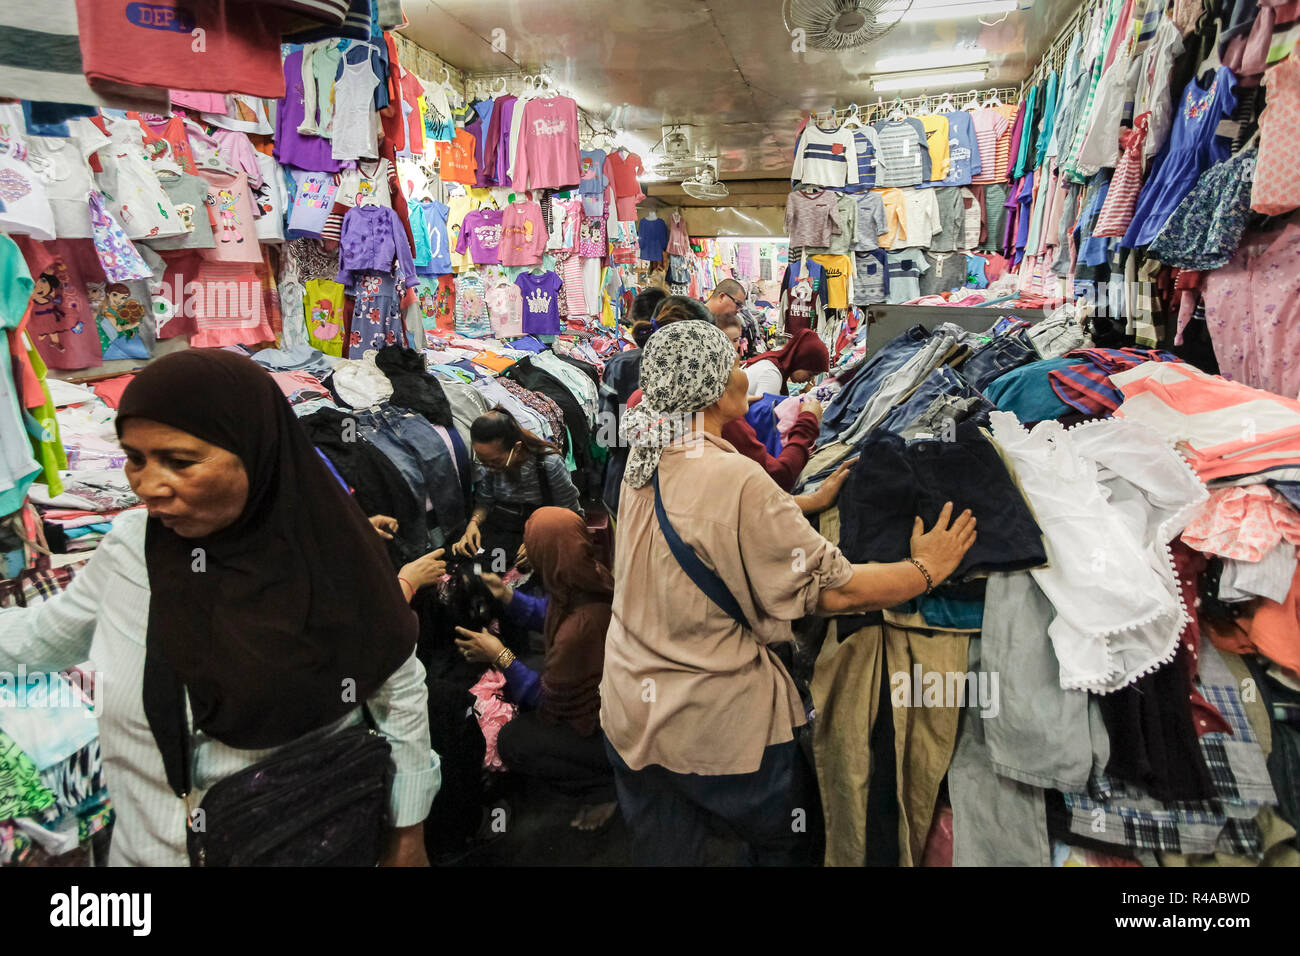 https://c8.alamy.com/comp/R4ABWD/local-women-piles-of-cheap-clothing-for-sale-at-the-toul-tum-poung-russian-market-toul-tum-poung-city-centre-phnom-penh-cambodia-R4ABWD.jpg